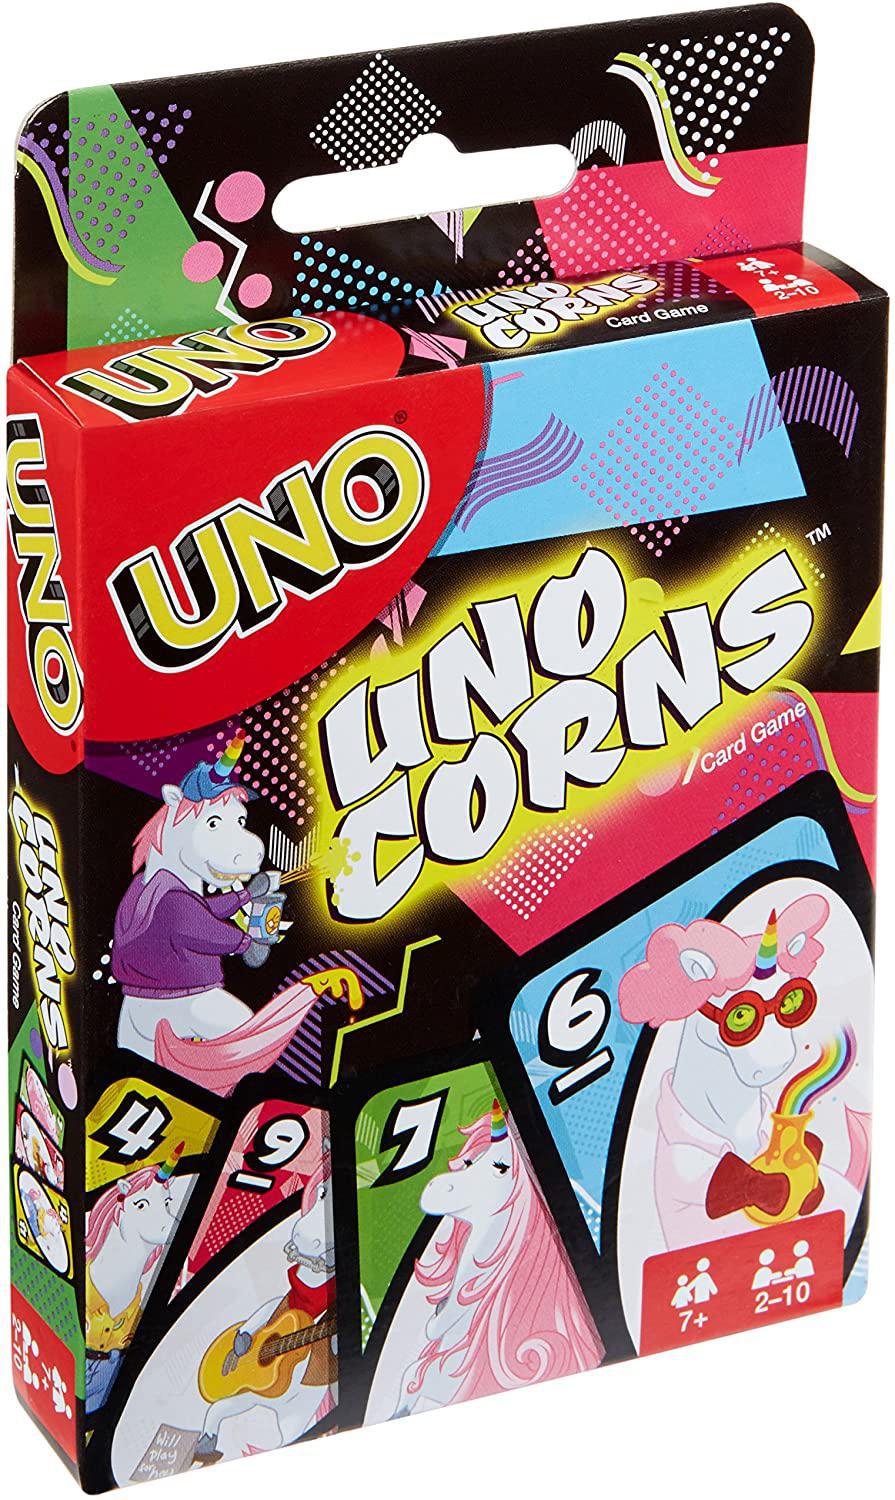 UNO: UNOcorns - Playing Card Game, Colorful Unicorns! - Includes 112 Cards, For 2 to 10 Players, Ages 7